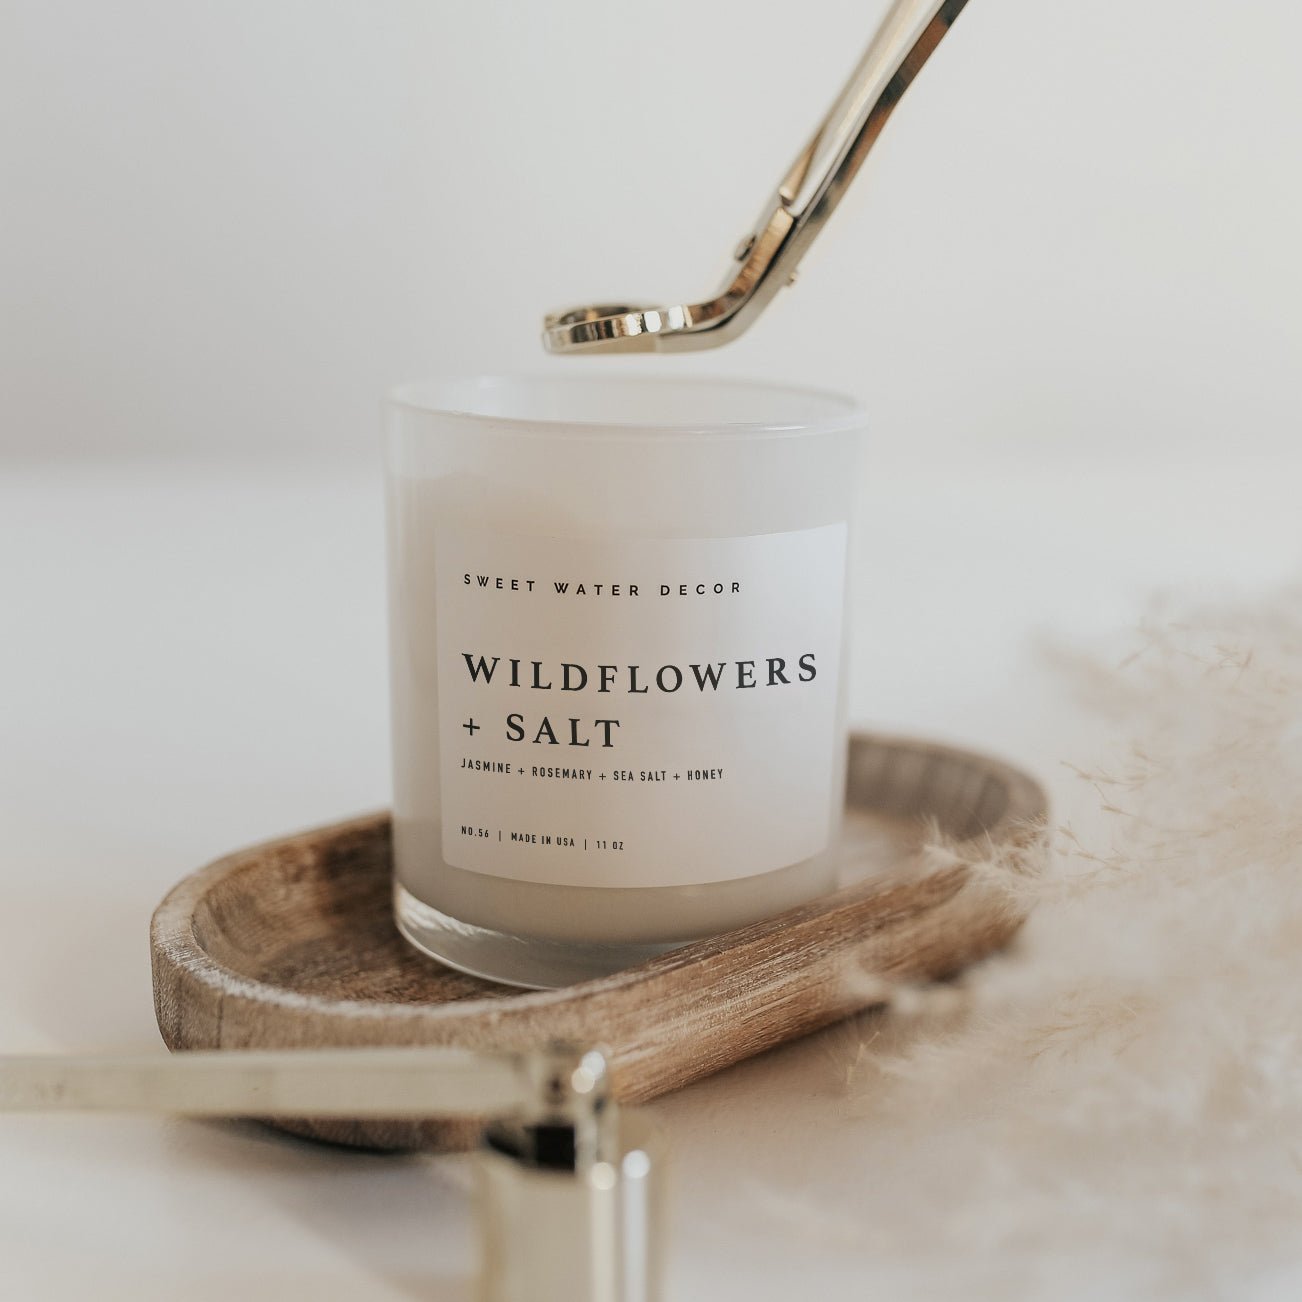 Wildflowers and Salt Soy Candle - White Jar - 11 oz - Sweet Water Decor - Candles